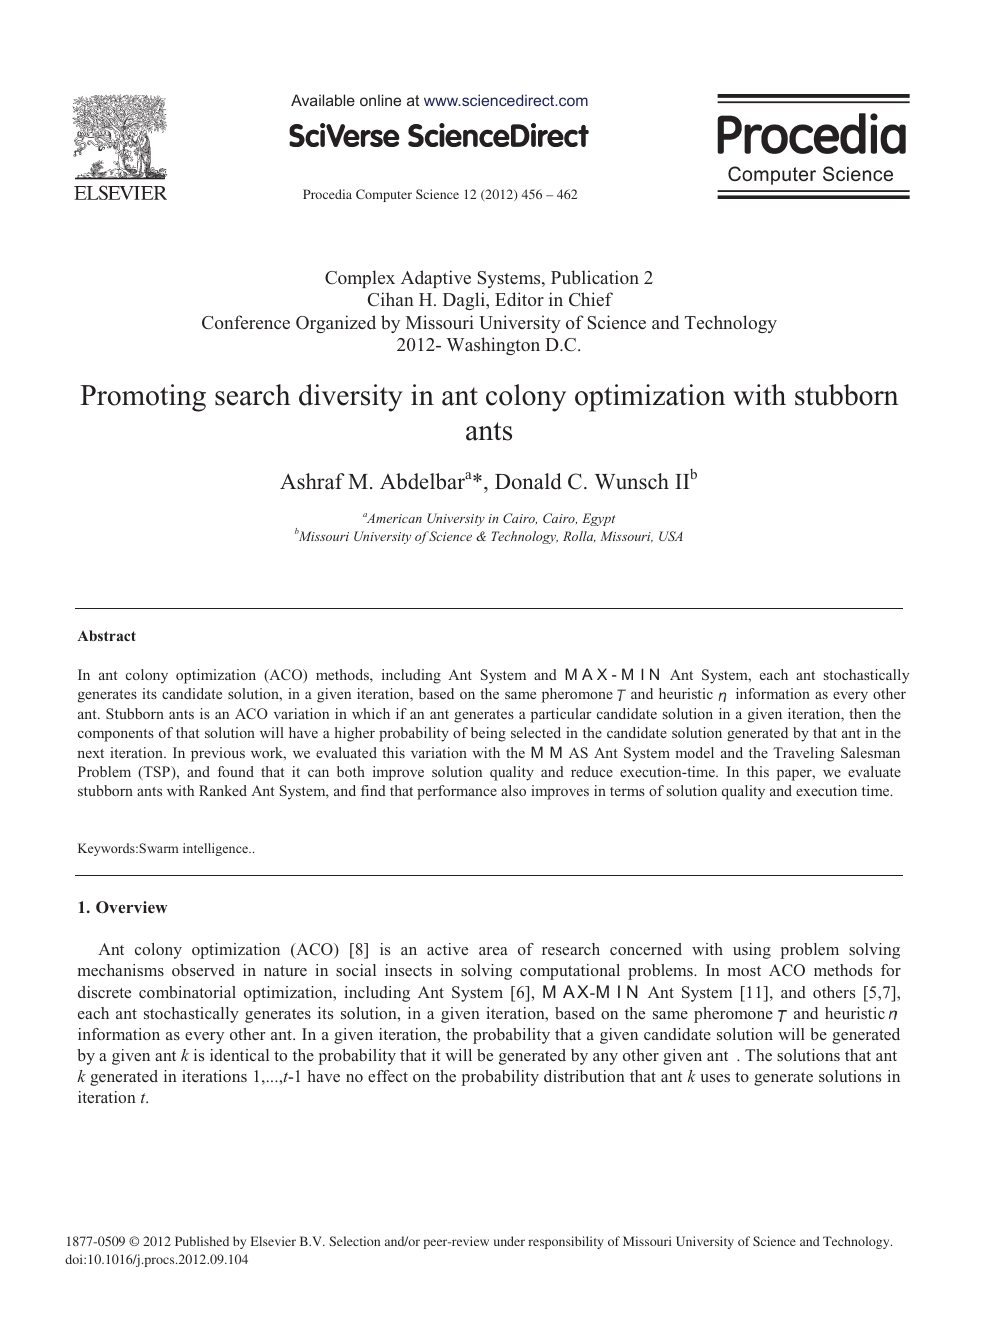 Promoting Search Diversity In Ant Colony Optimization With Stubborn Ants Topic Of Research Paper In Economics And Business Download Scholarly Article Pdf And Read For Free On Cyberleninka Open Science Hub